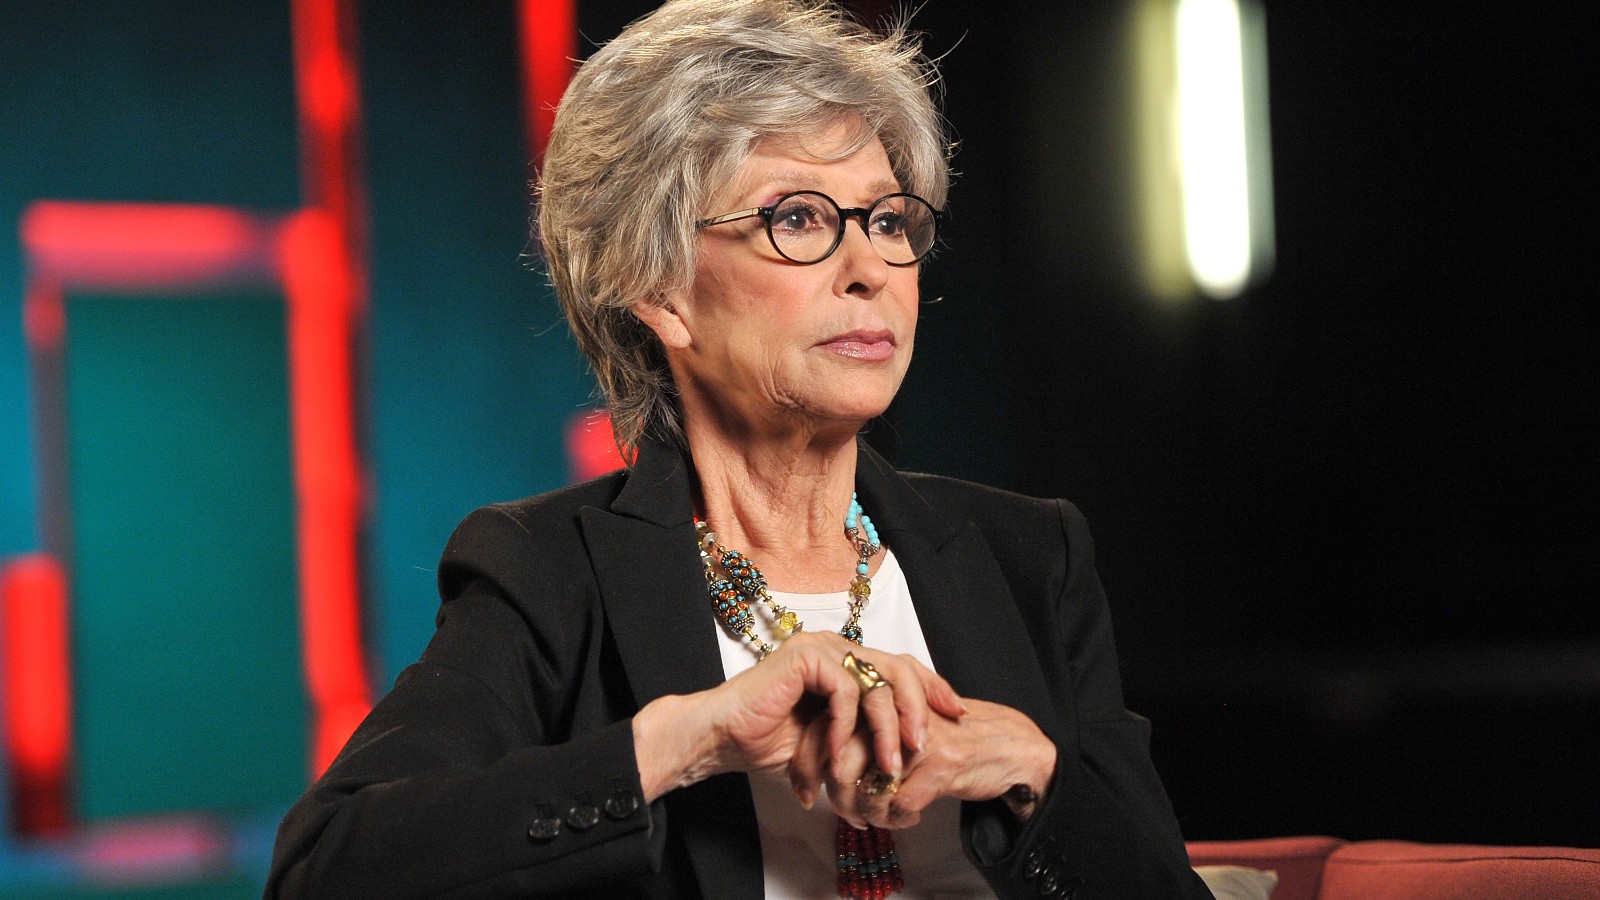 Rita Moreno shares how 'West Side Story' changed her life